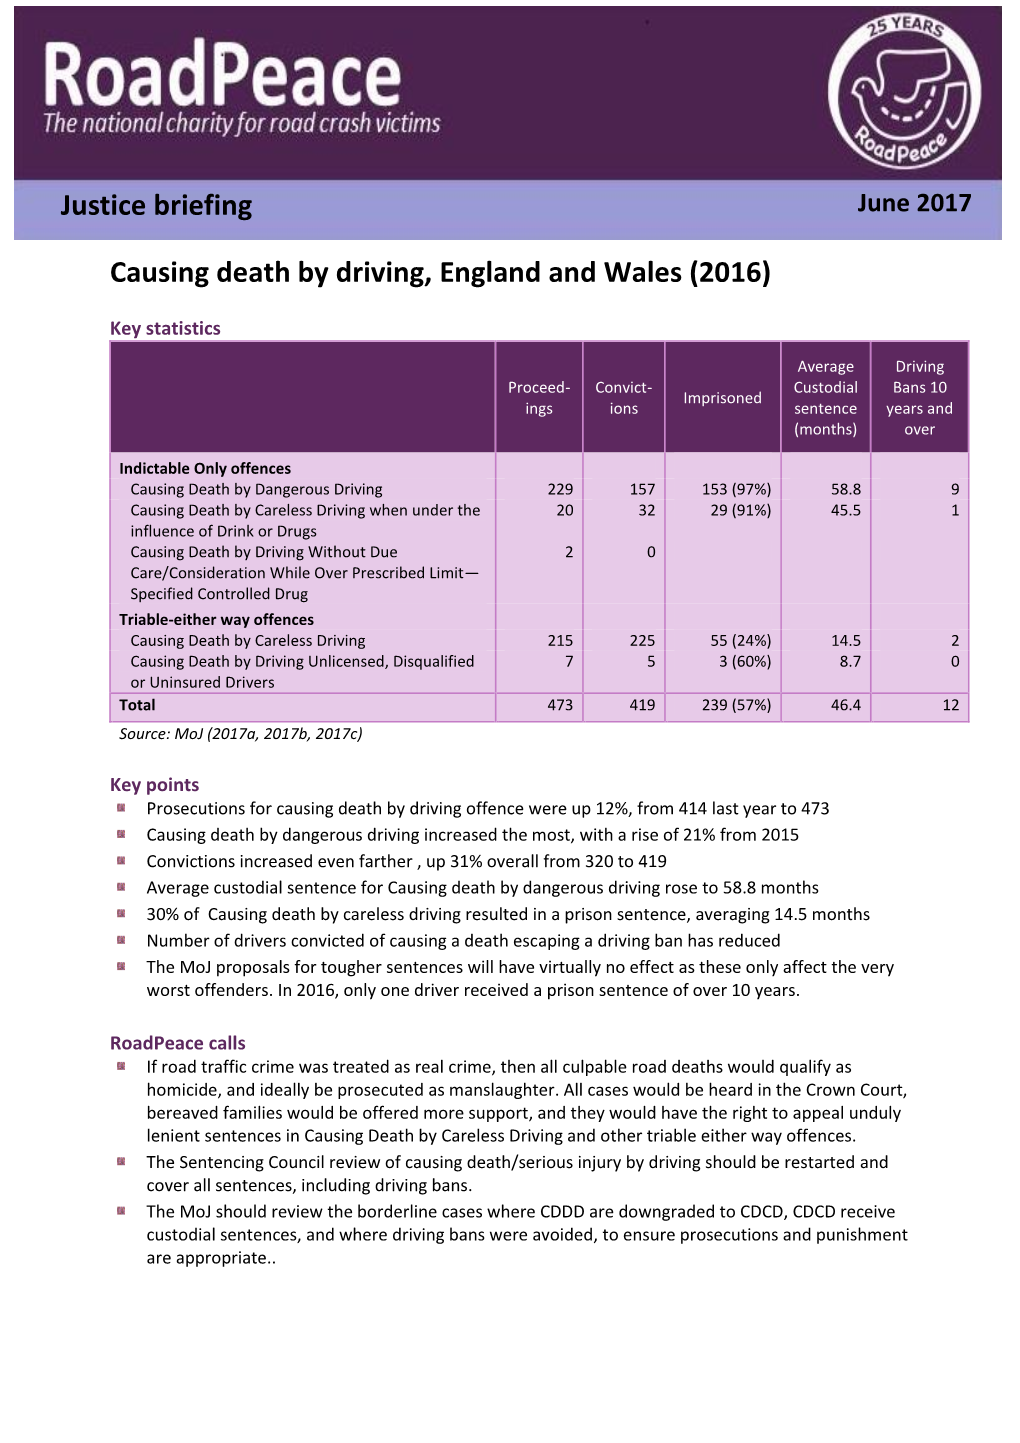 Causing Death by Driving, England and Wales (2016) Justice Briefing